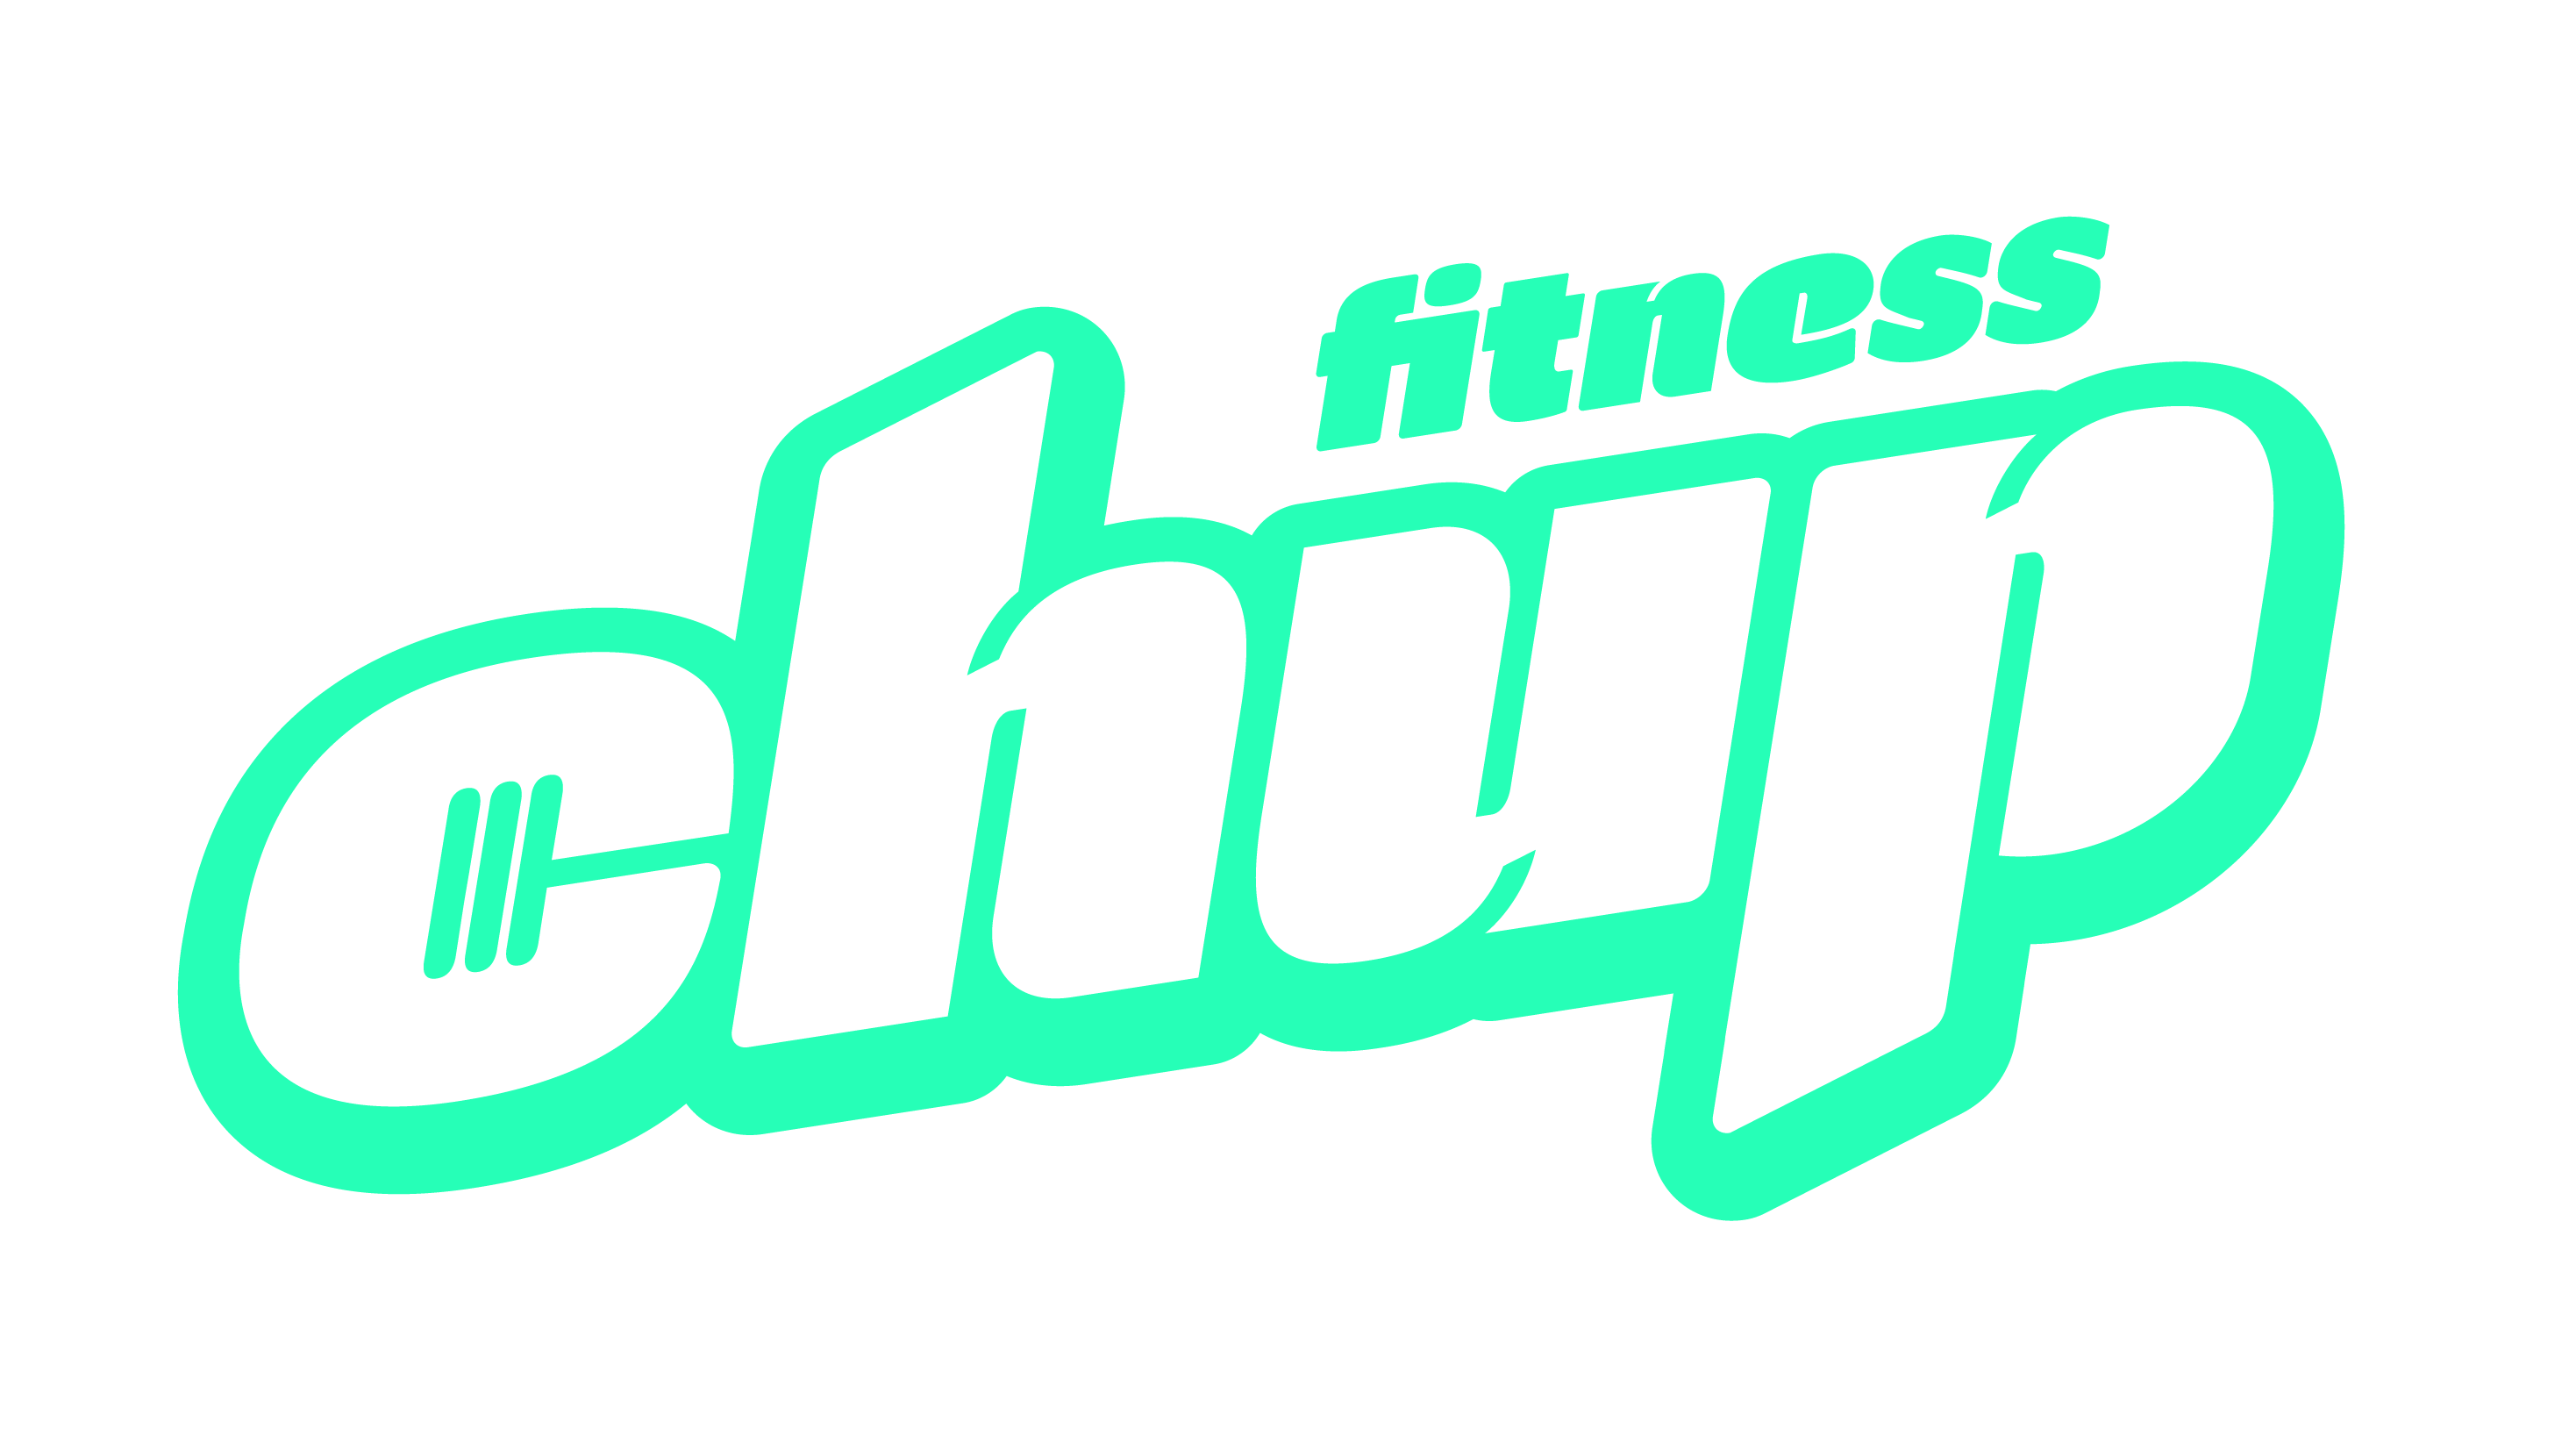 Chup Fitness